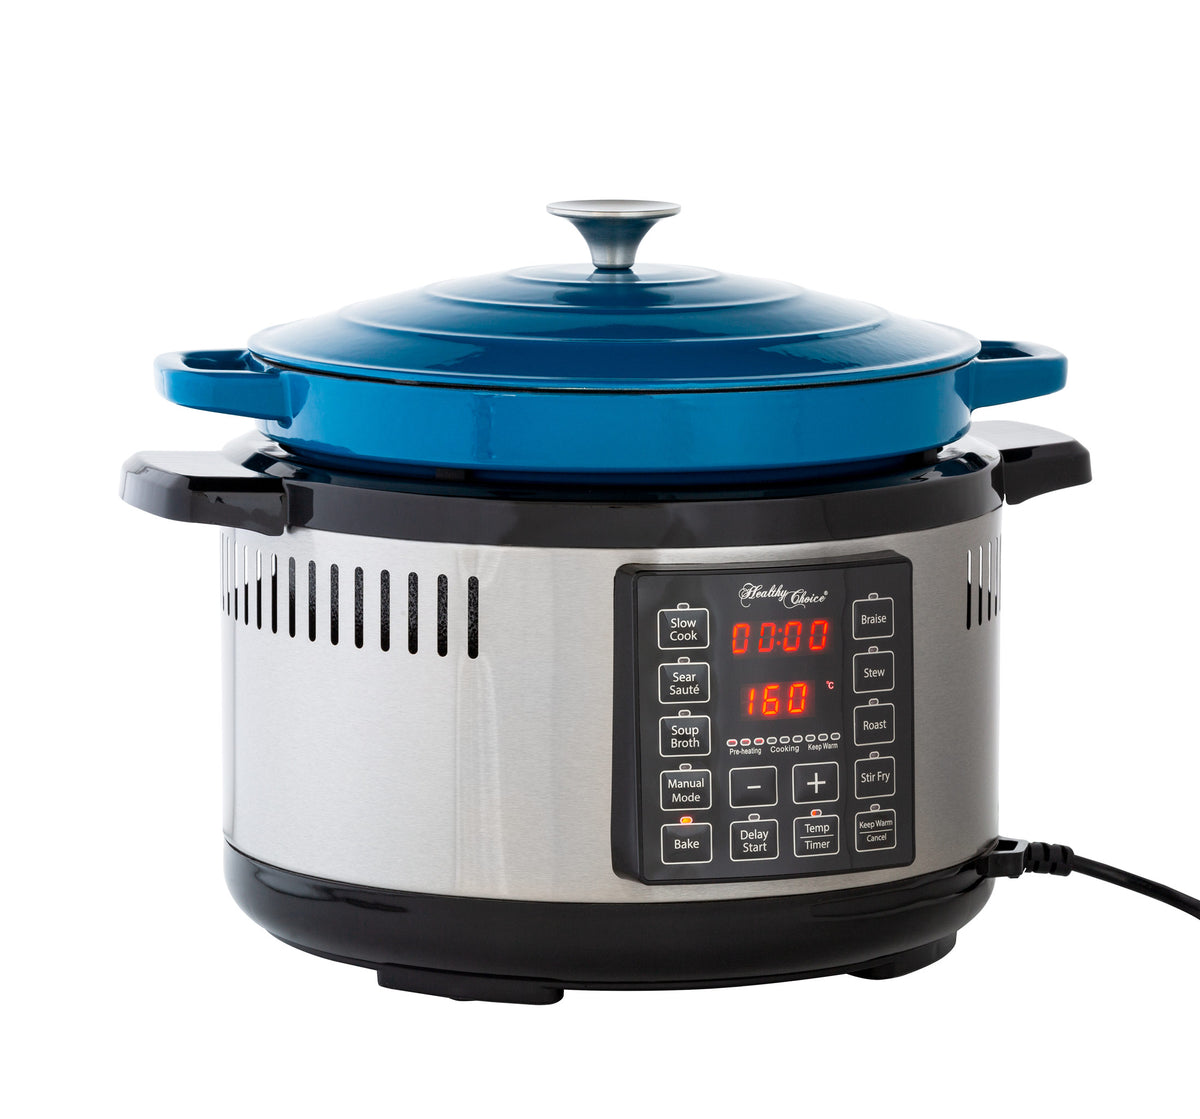 Angle view of the 6.5L Intelligent Digital Dutch Oven with blue cast iron pot and stainless steel housing.